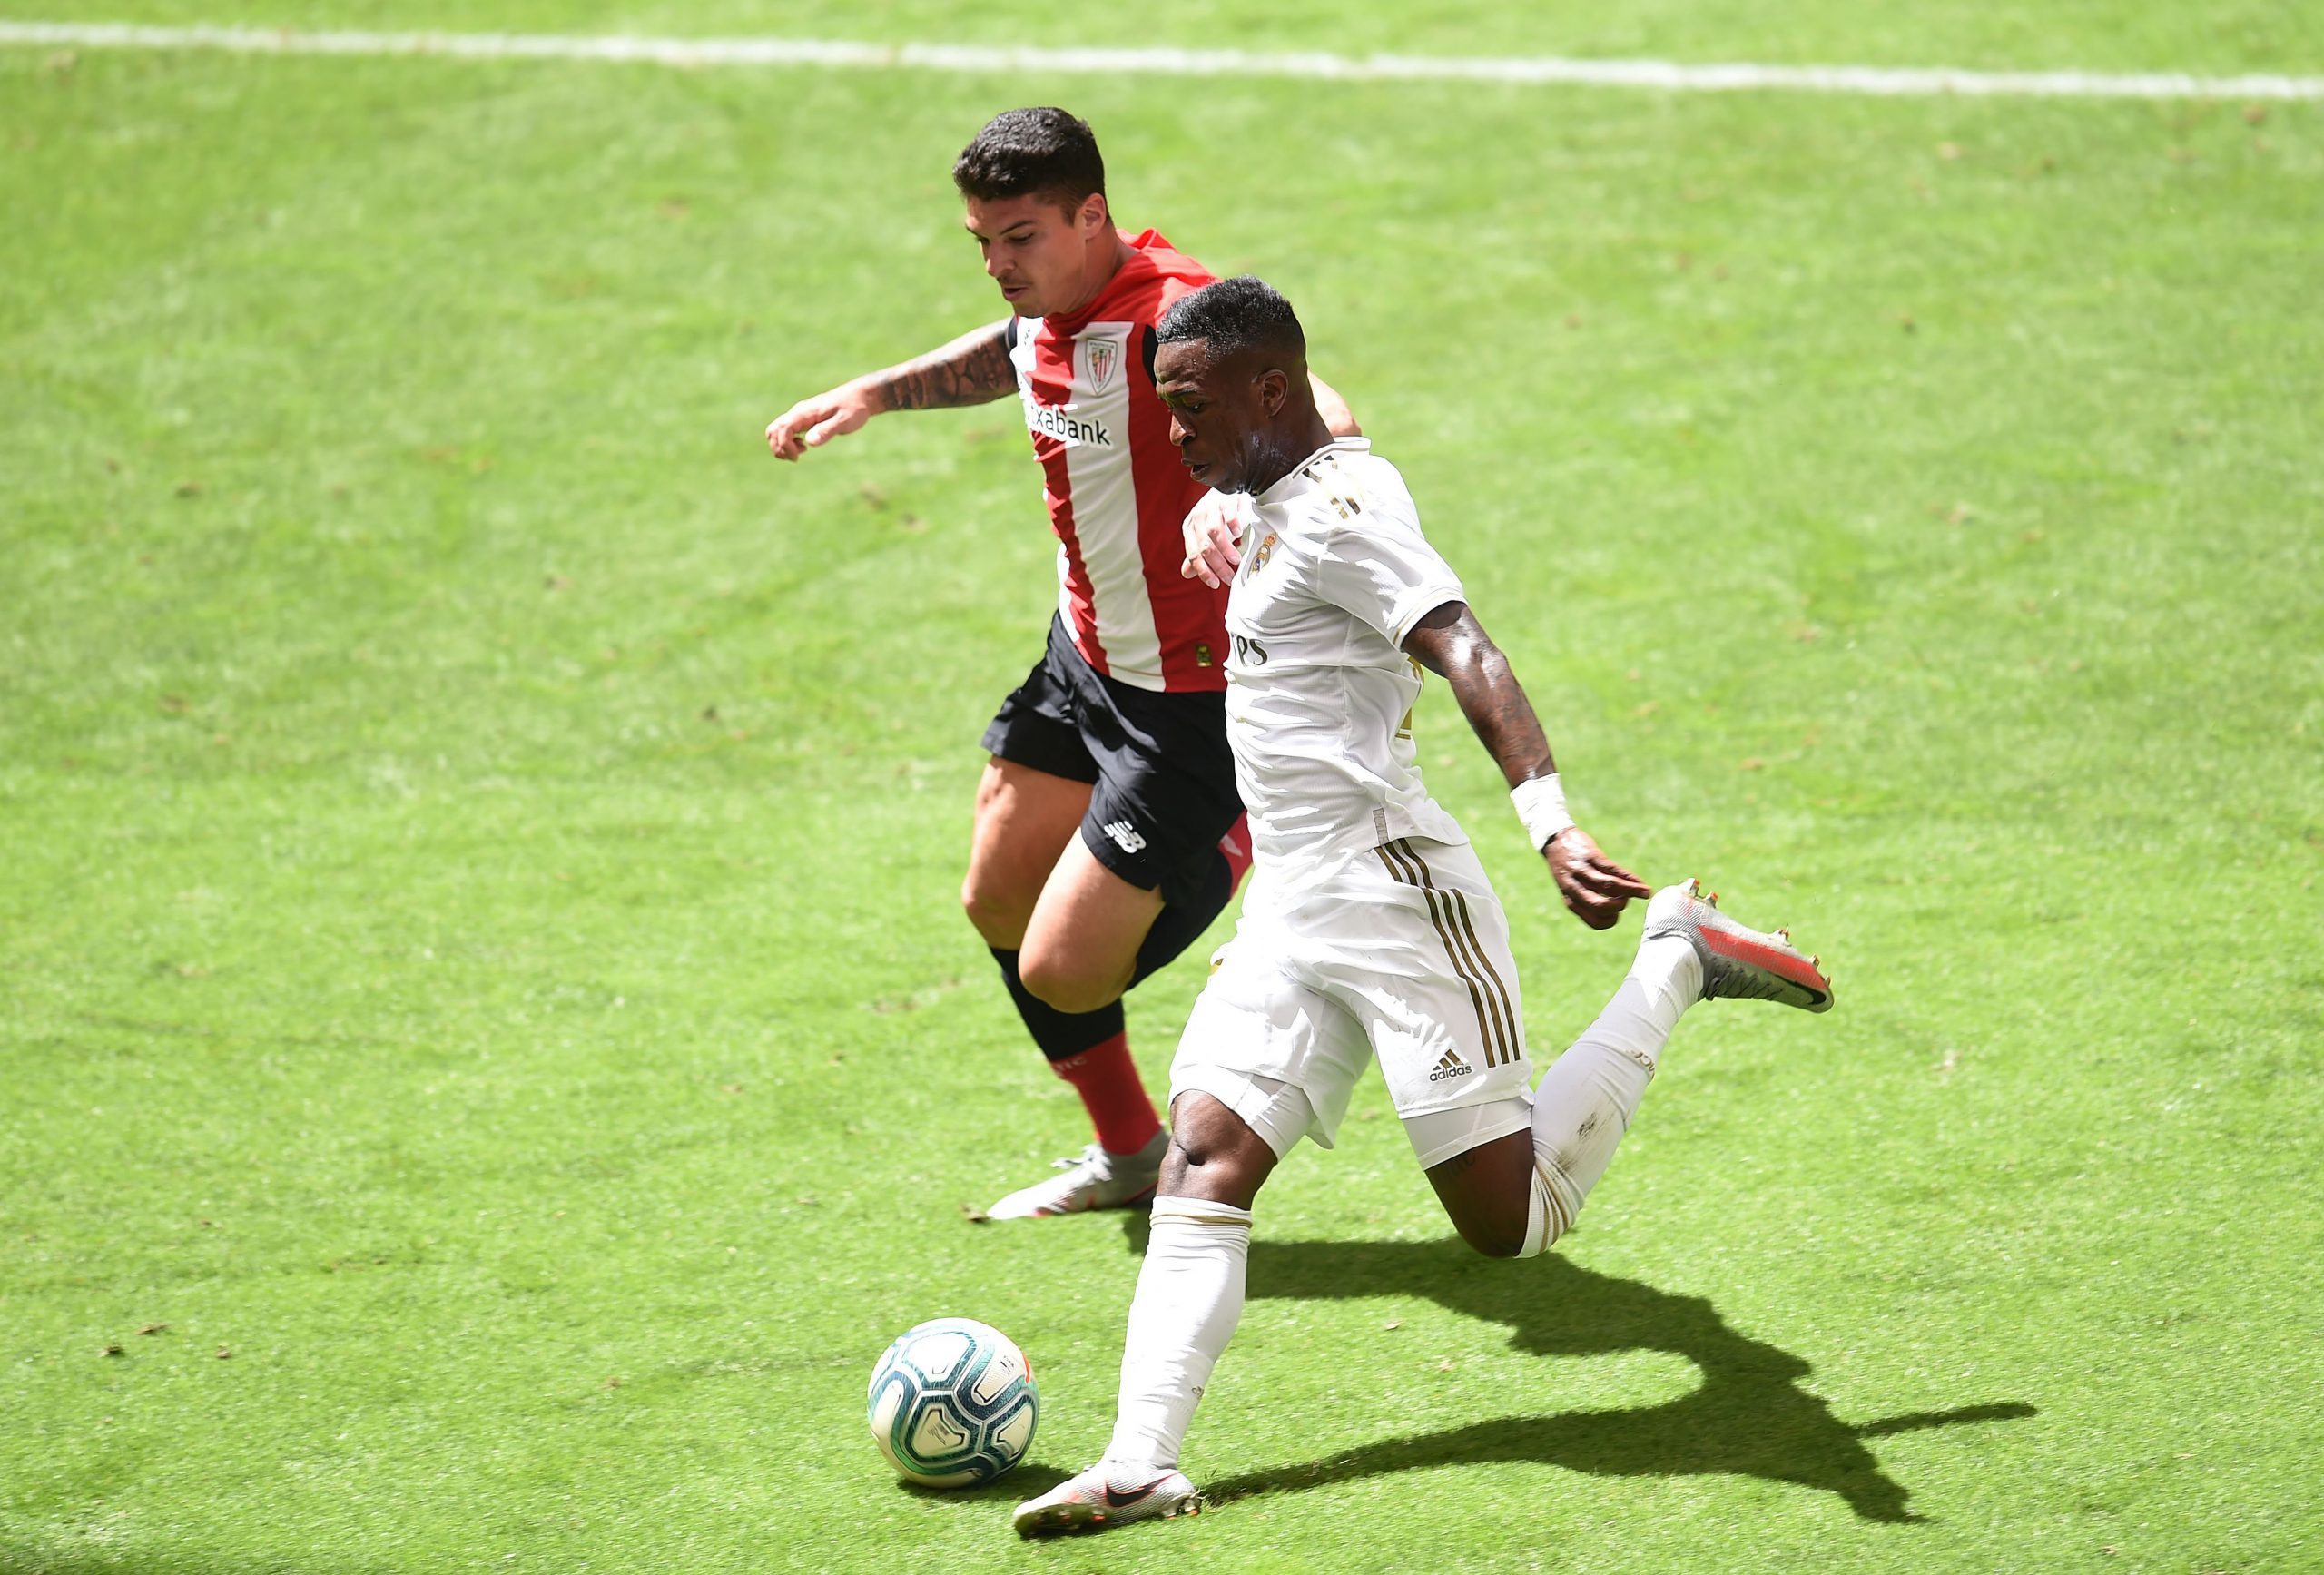 Liverpool eyeing a move for Vinicius Junior who is in action in the picture